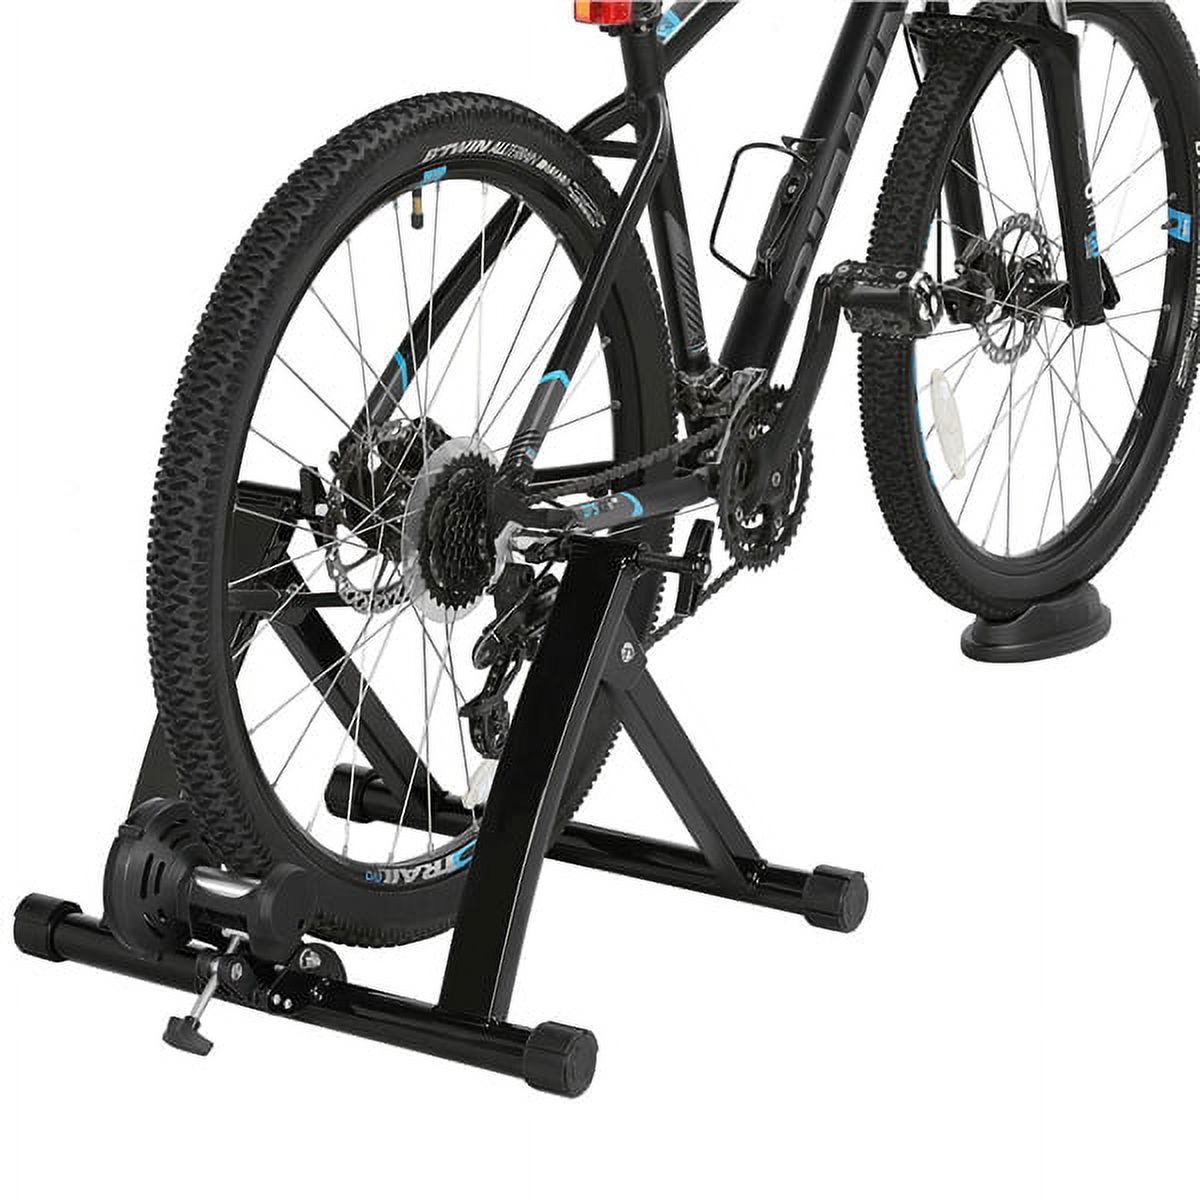 Topeakmart Foldable Indoor Bike Trainer Magnetic Cycle Trainer Stand with Front Wheel Support and Quick Release Skewer Black - image 4 of 14